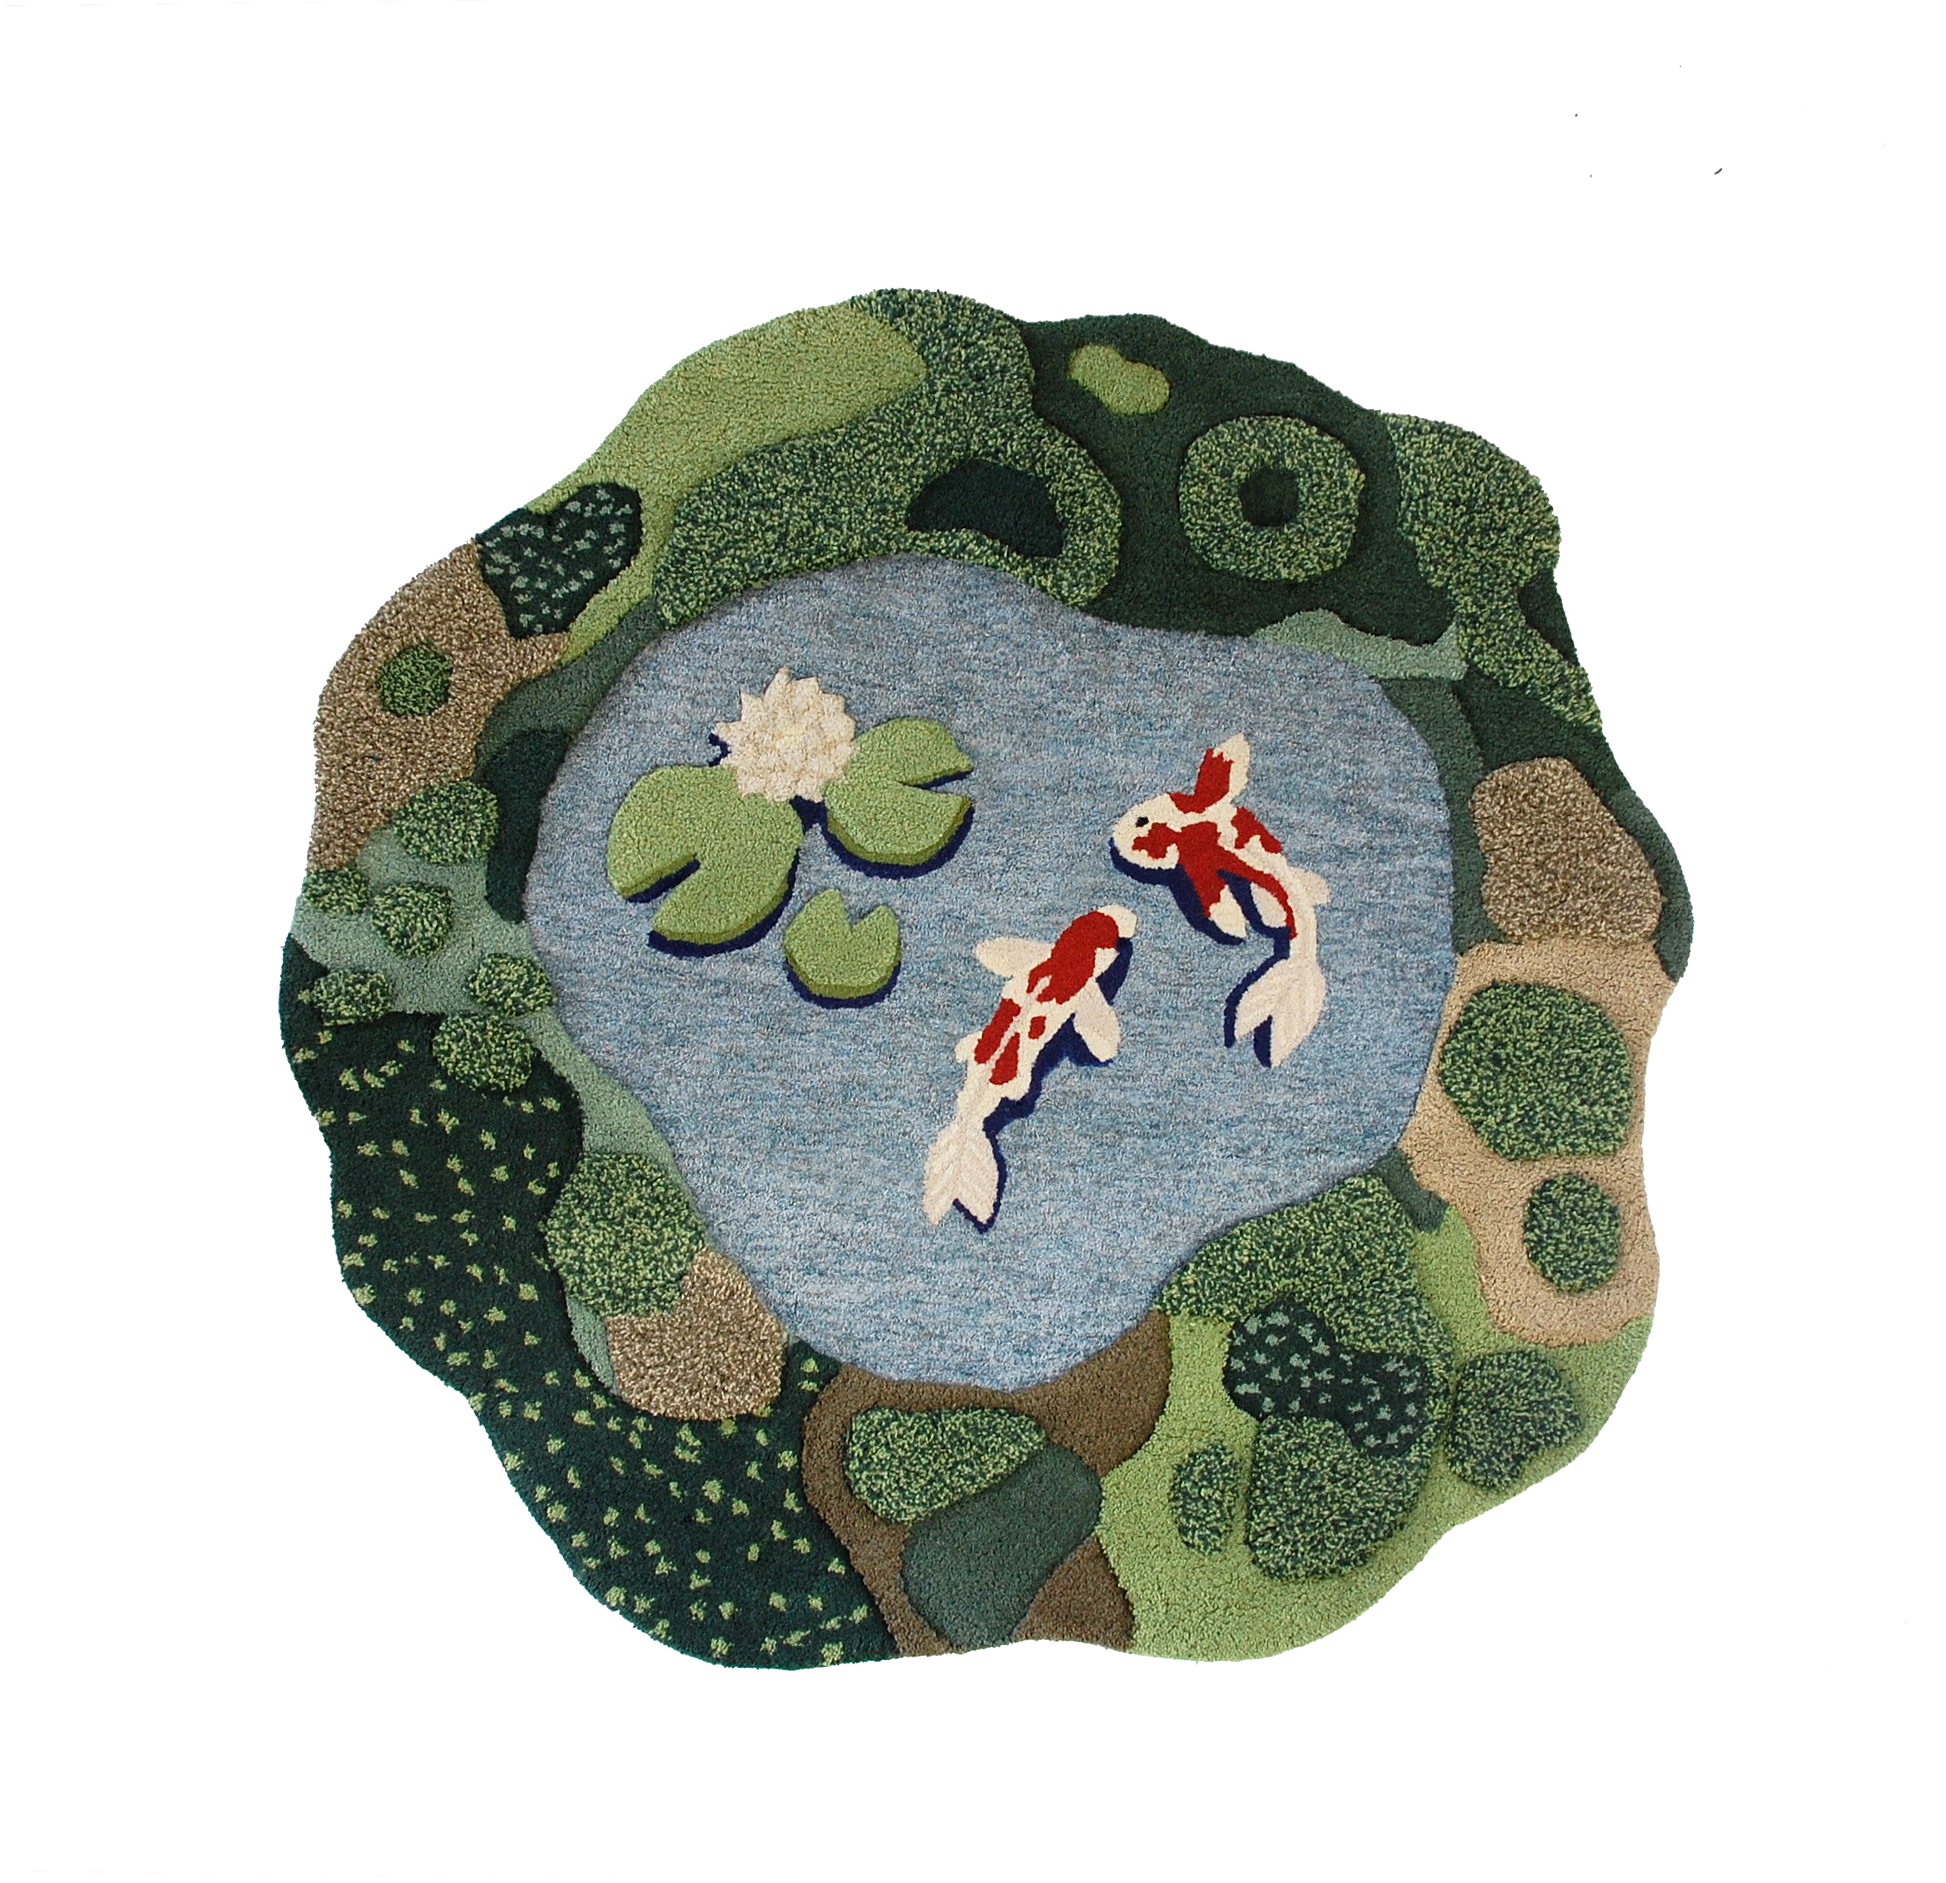 interior decoration Landscape Koi Pond Area Rug with Red and White Koi fish, Lily pads, and a water lily. Shipped from Canada